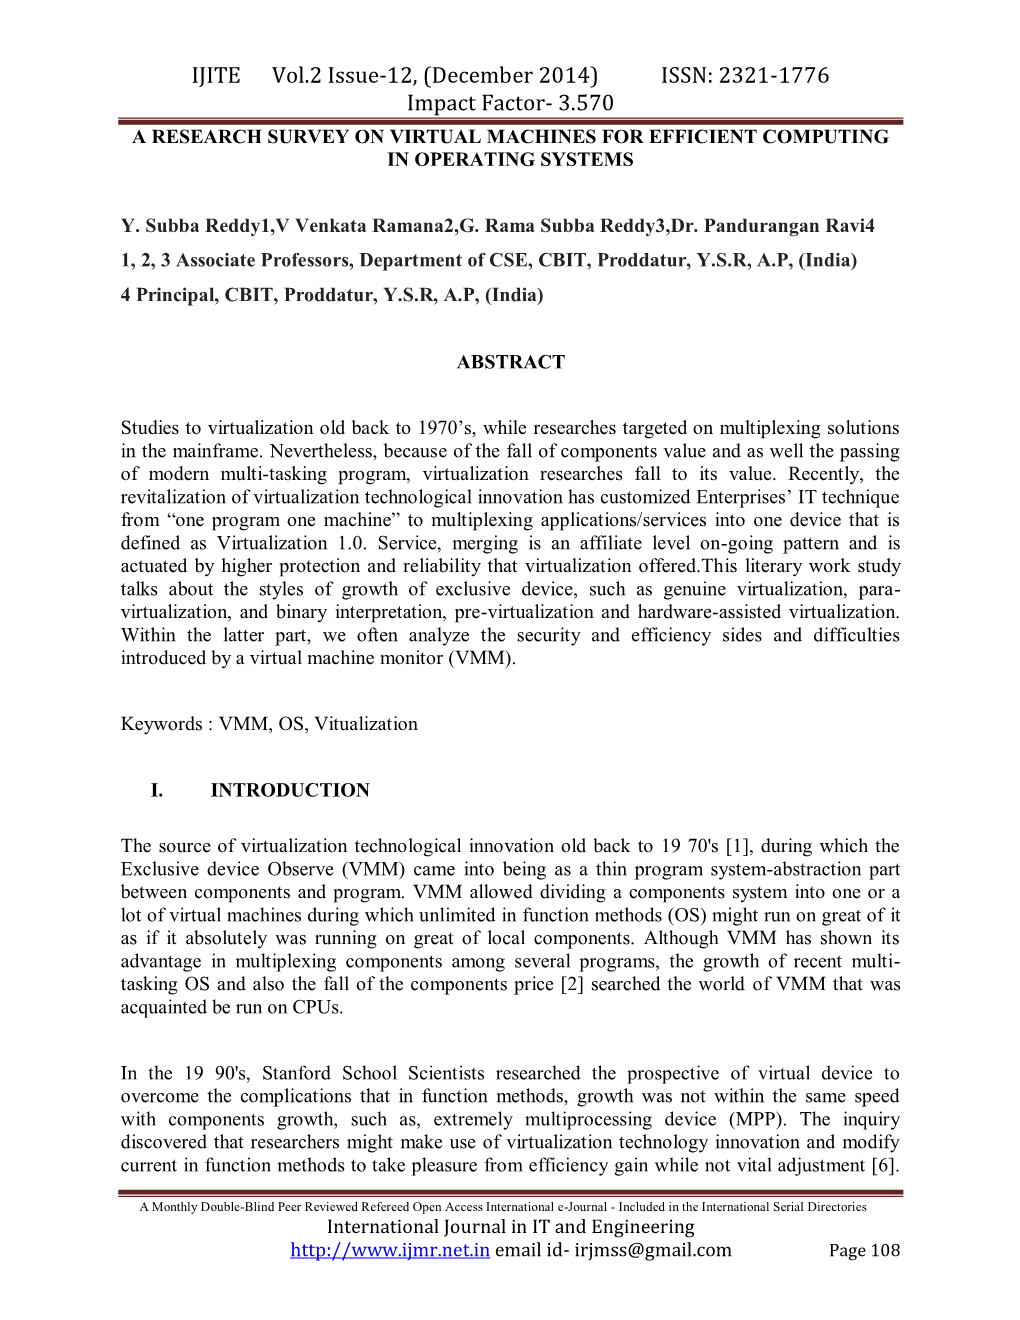 IJITE Vol.2 Issue-12, (December 2014) ISSN: 2321-1776 Impact Factor- 3.570 a RESEARCH SURVEY on VIRTUAL MACHINES for EFFICIENT COMPUTING in OPERATING SYSTEMS